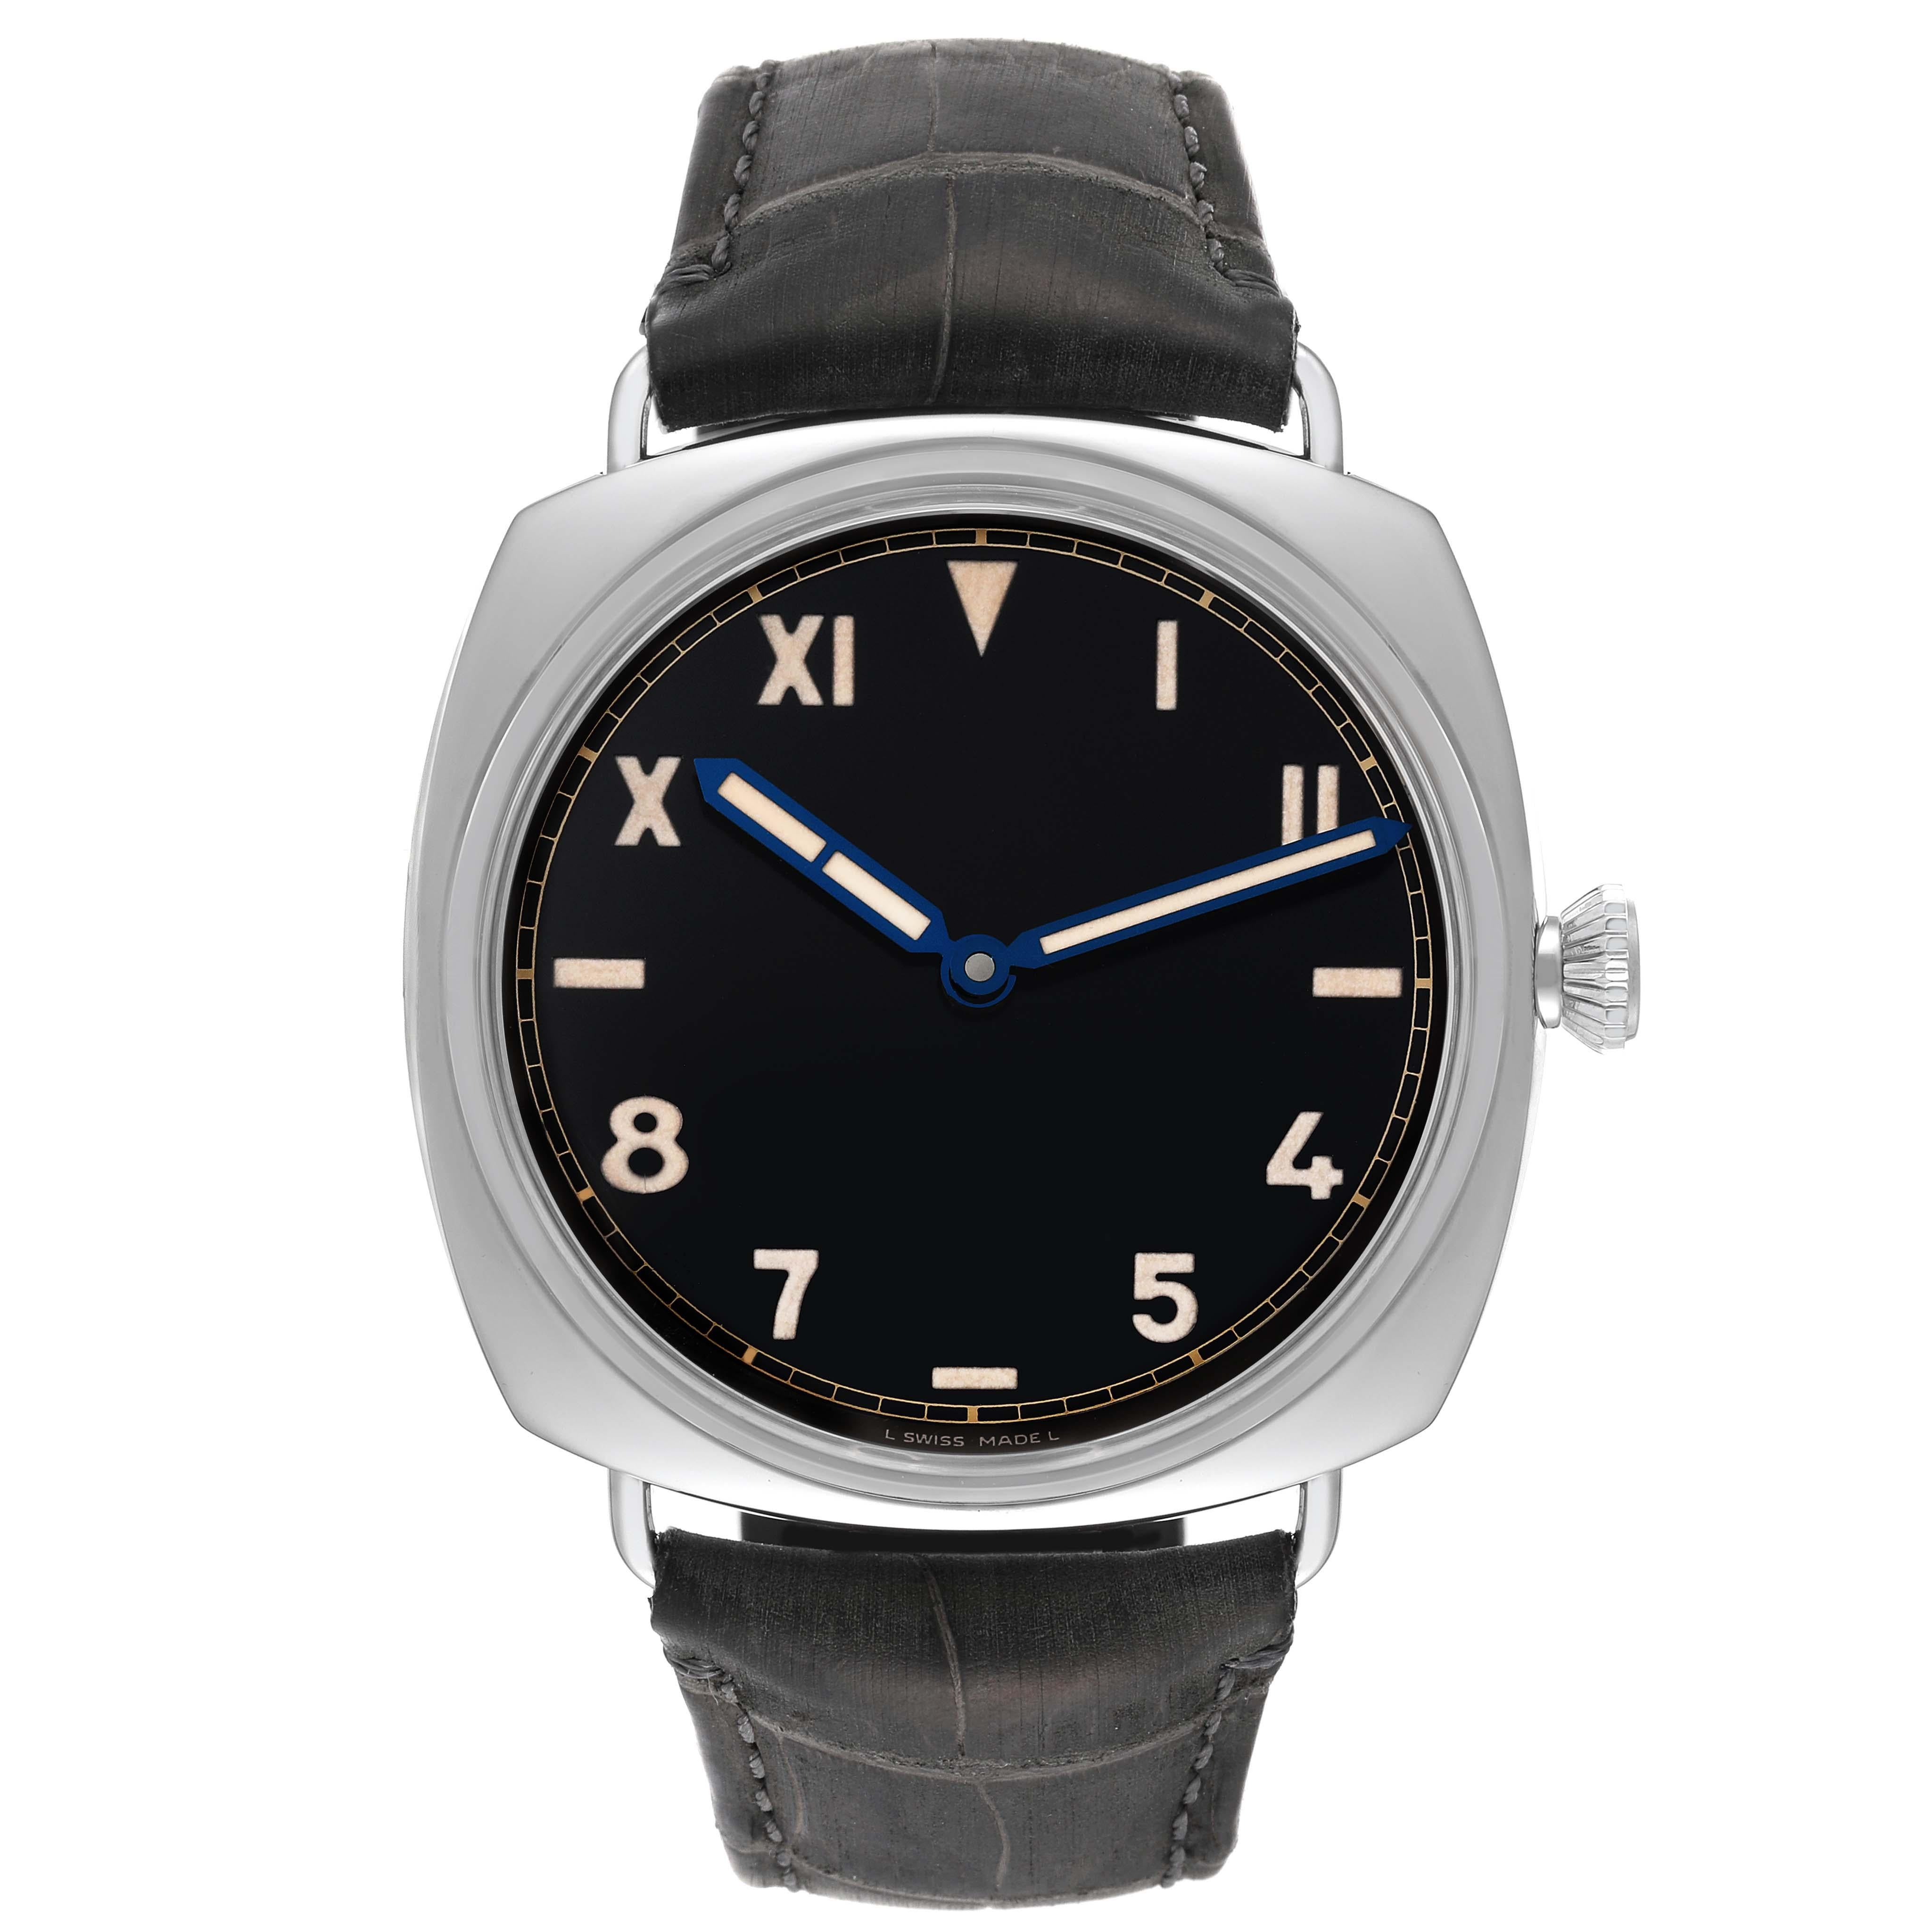 Panerai Radiomir 1936 Brevettato Black Dial Steel Mens Watch PAM00249. Manual winding movement. Two part cushion shaped stainless steel case 47mm in diameter. Exhibition transparent sapphire crystal case back. Polished stainless steel sloped bezel.